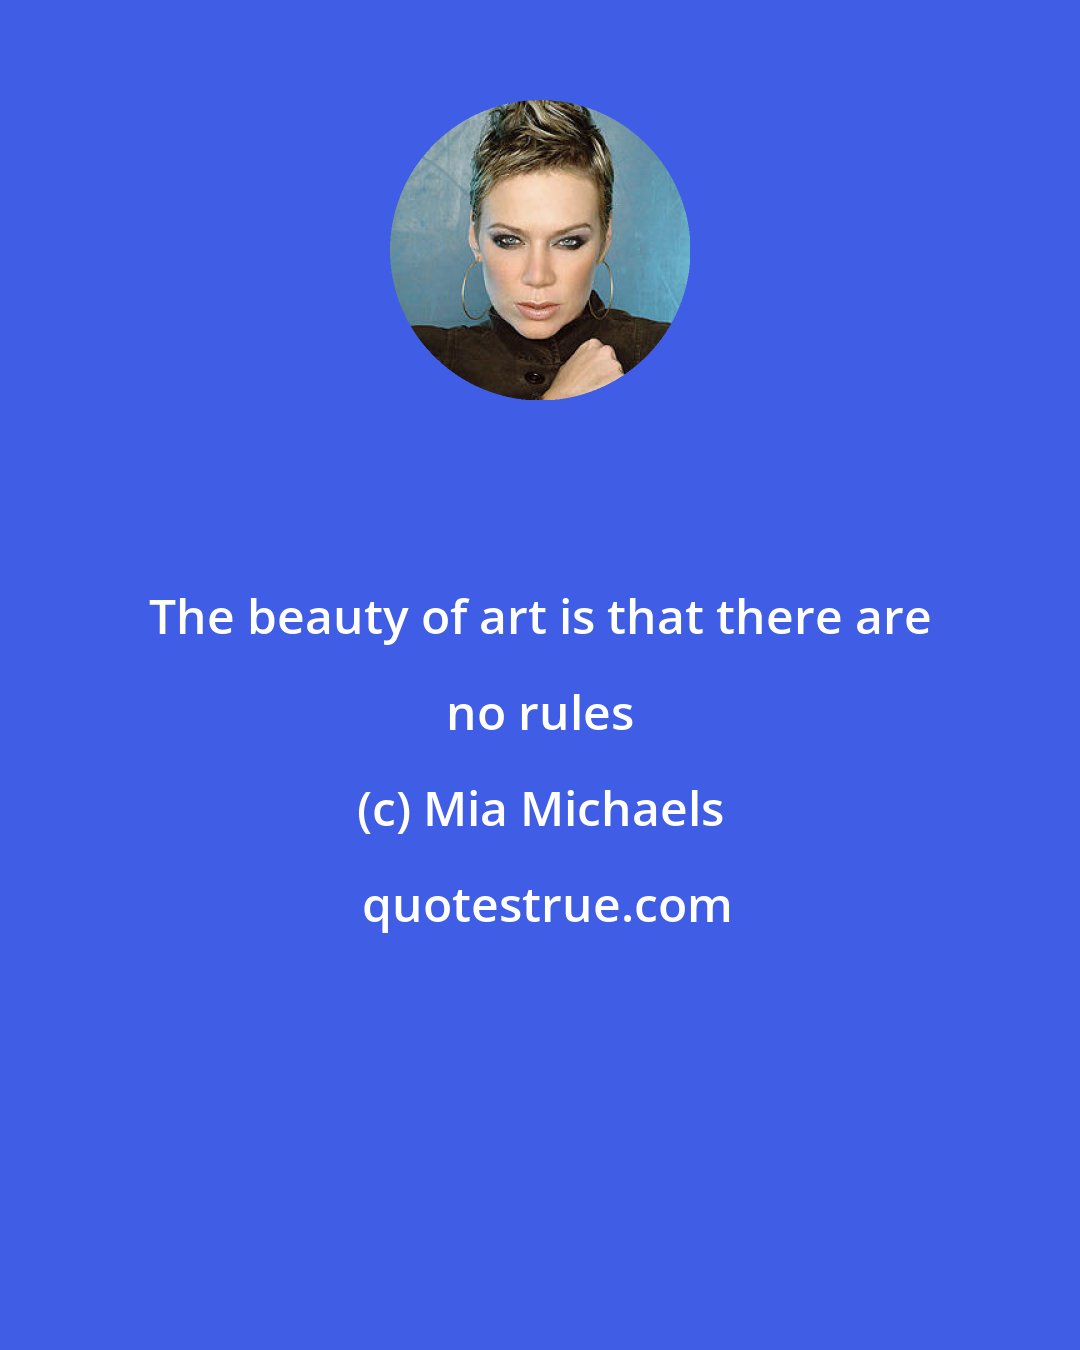 Mia Michaels: The beauty of art is that there are no rules